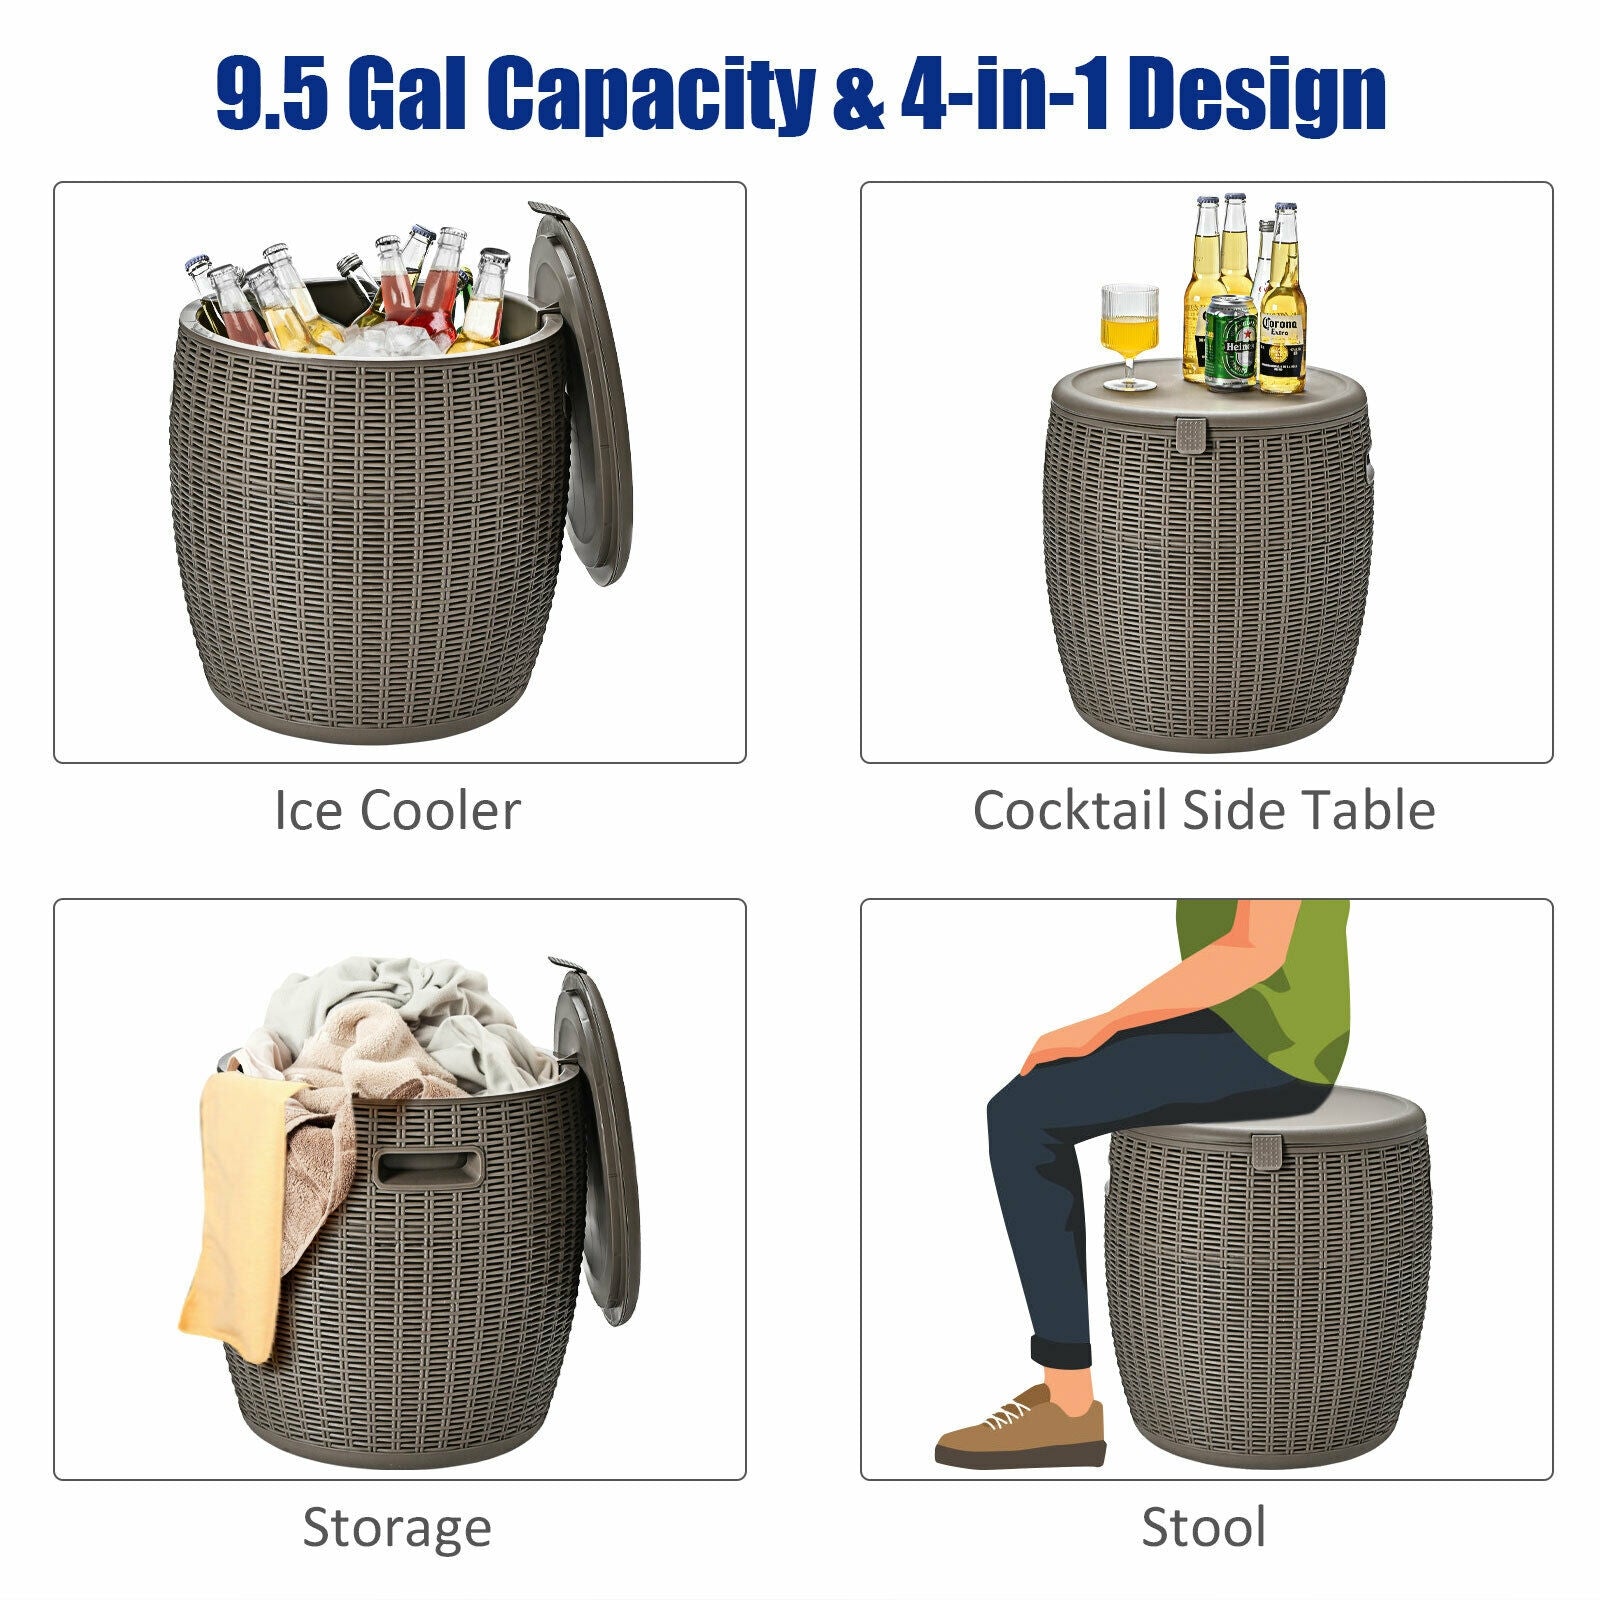 Versatile Ice Cooler for Various Uses: When the lid is closed, our ice bucket can also function as a versatile stool and storage box in addition to its excellent capability of keeping drinks cold for hours when filled with ice. It can be transformed into a stylish cocktail side table, adding functionality to your outdoor space.